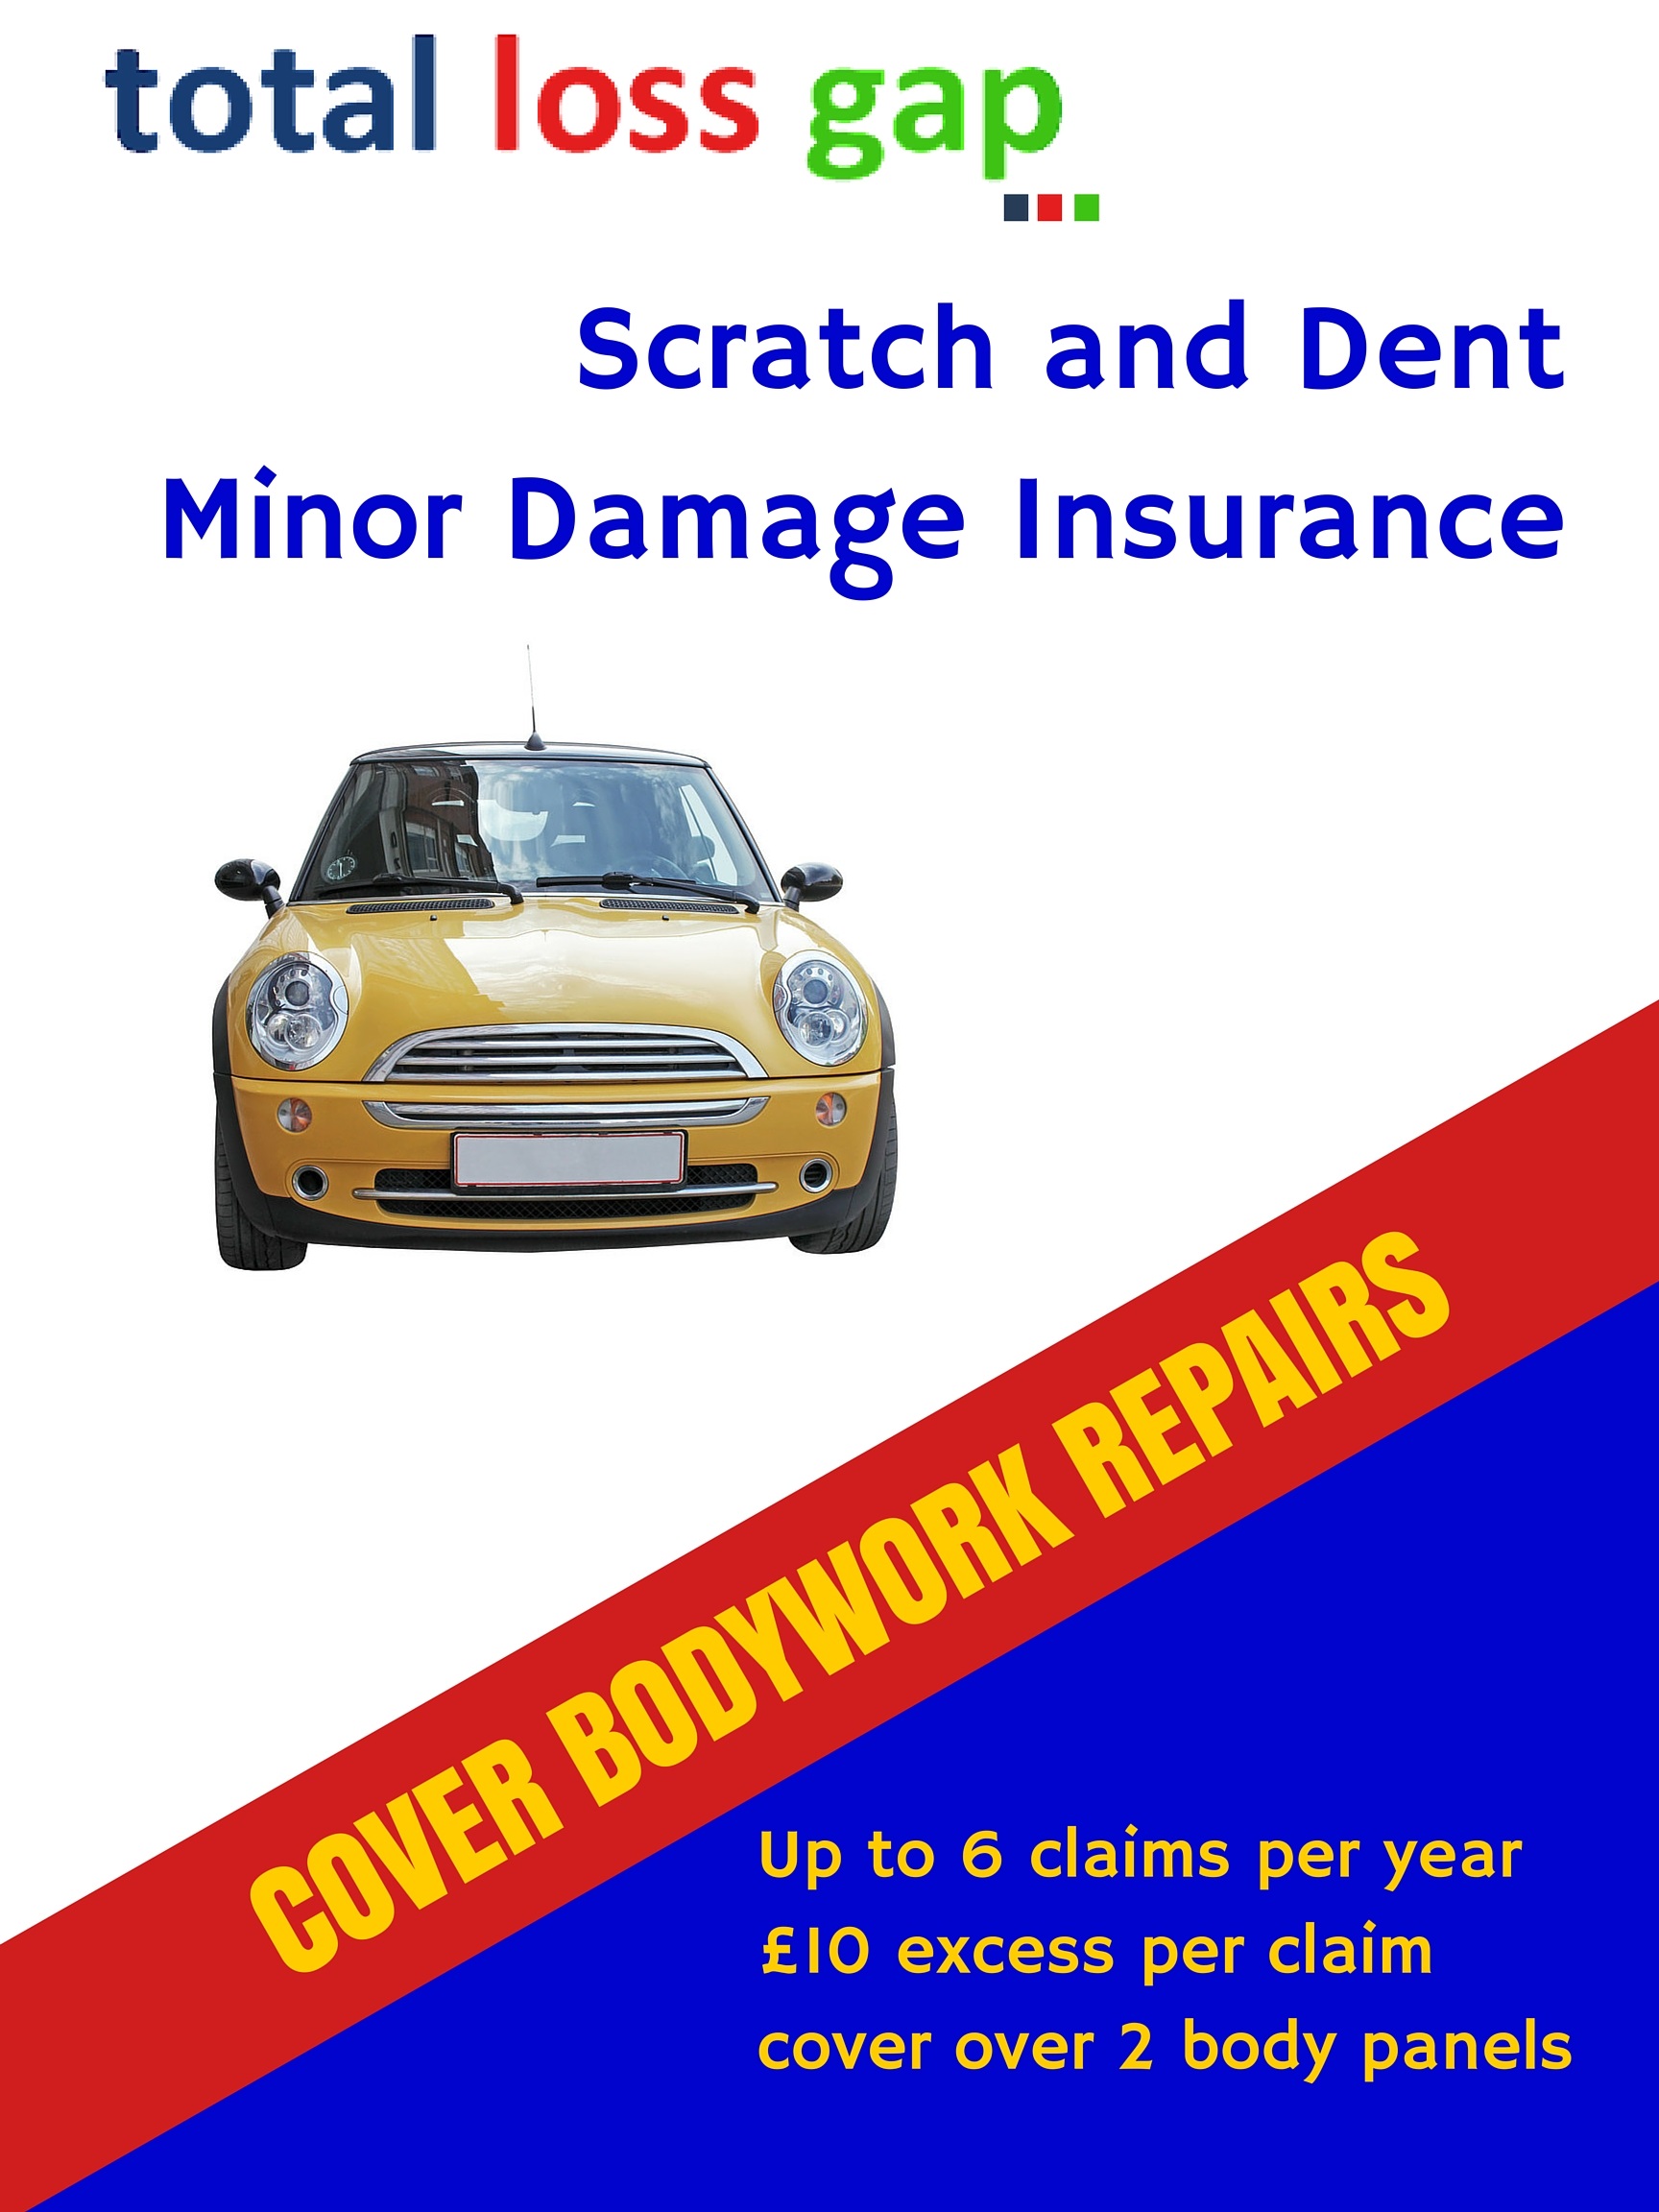 Scratch and Dent Insurance